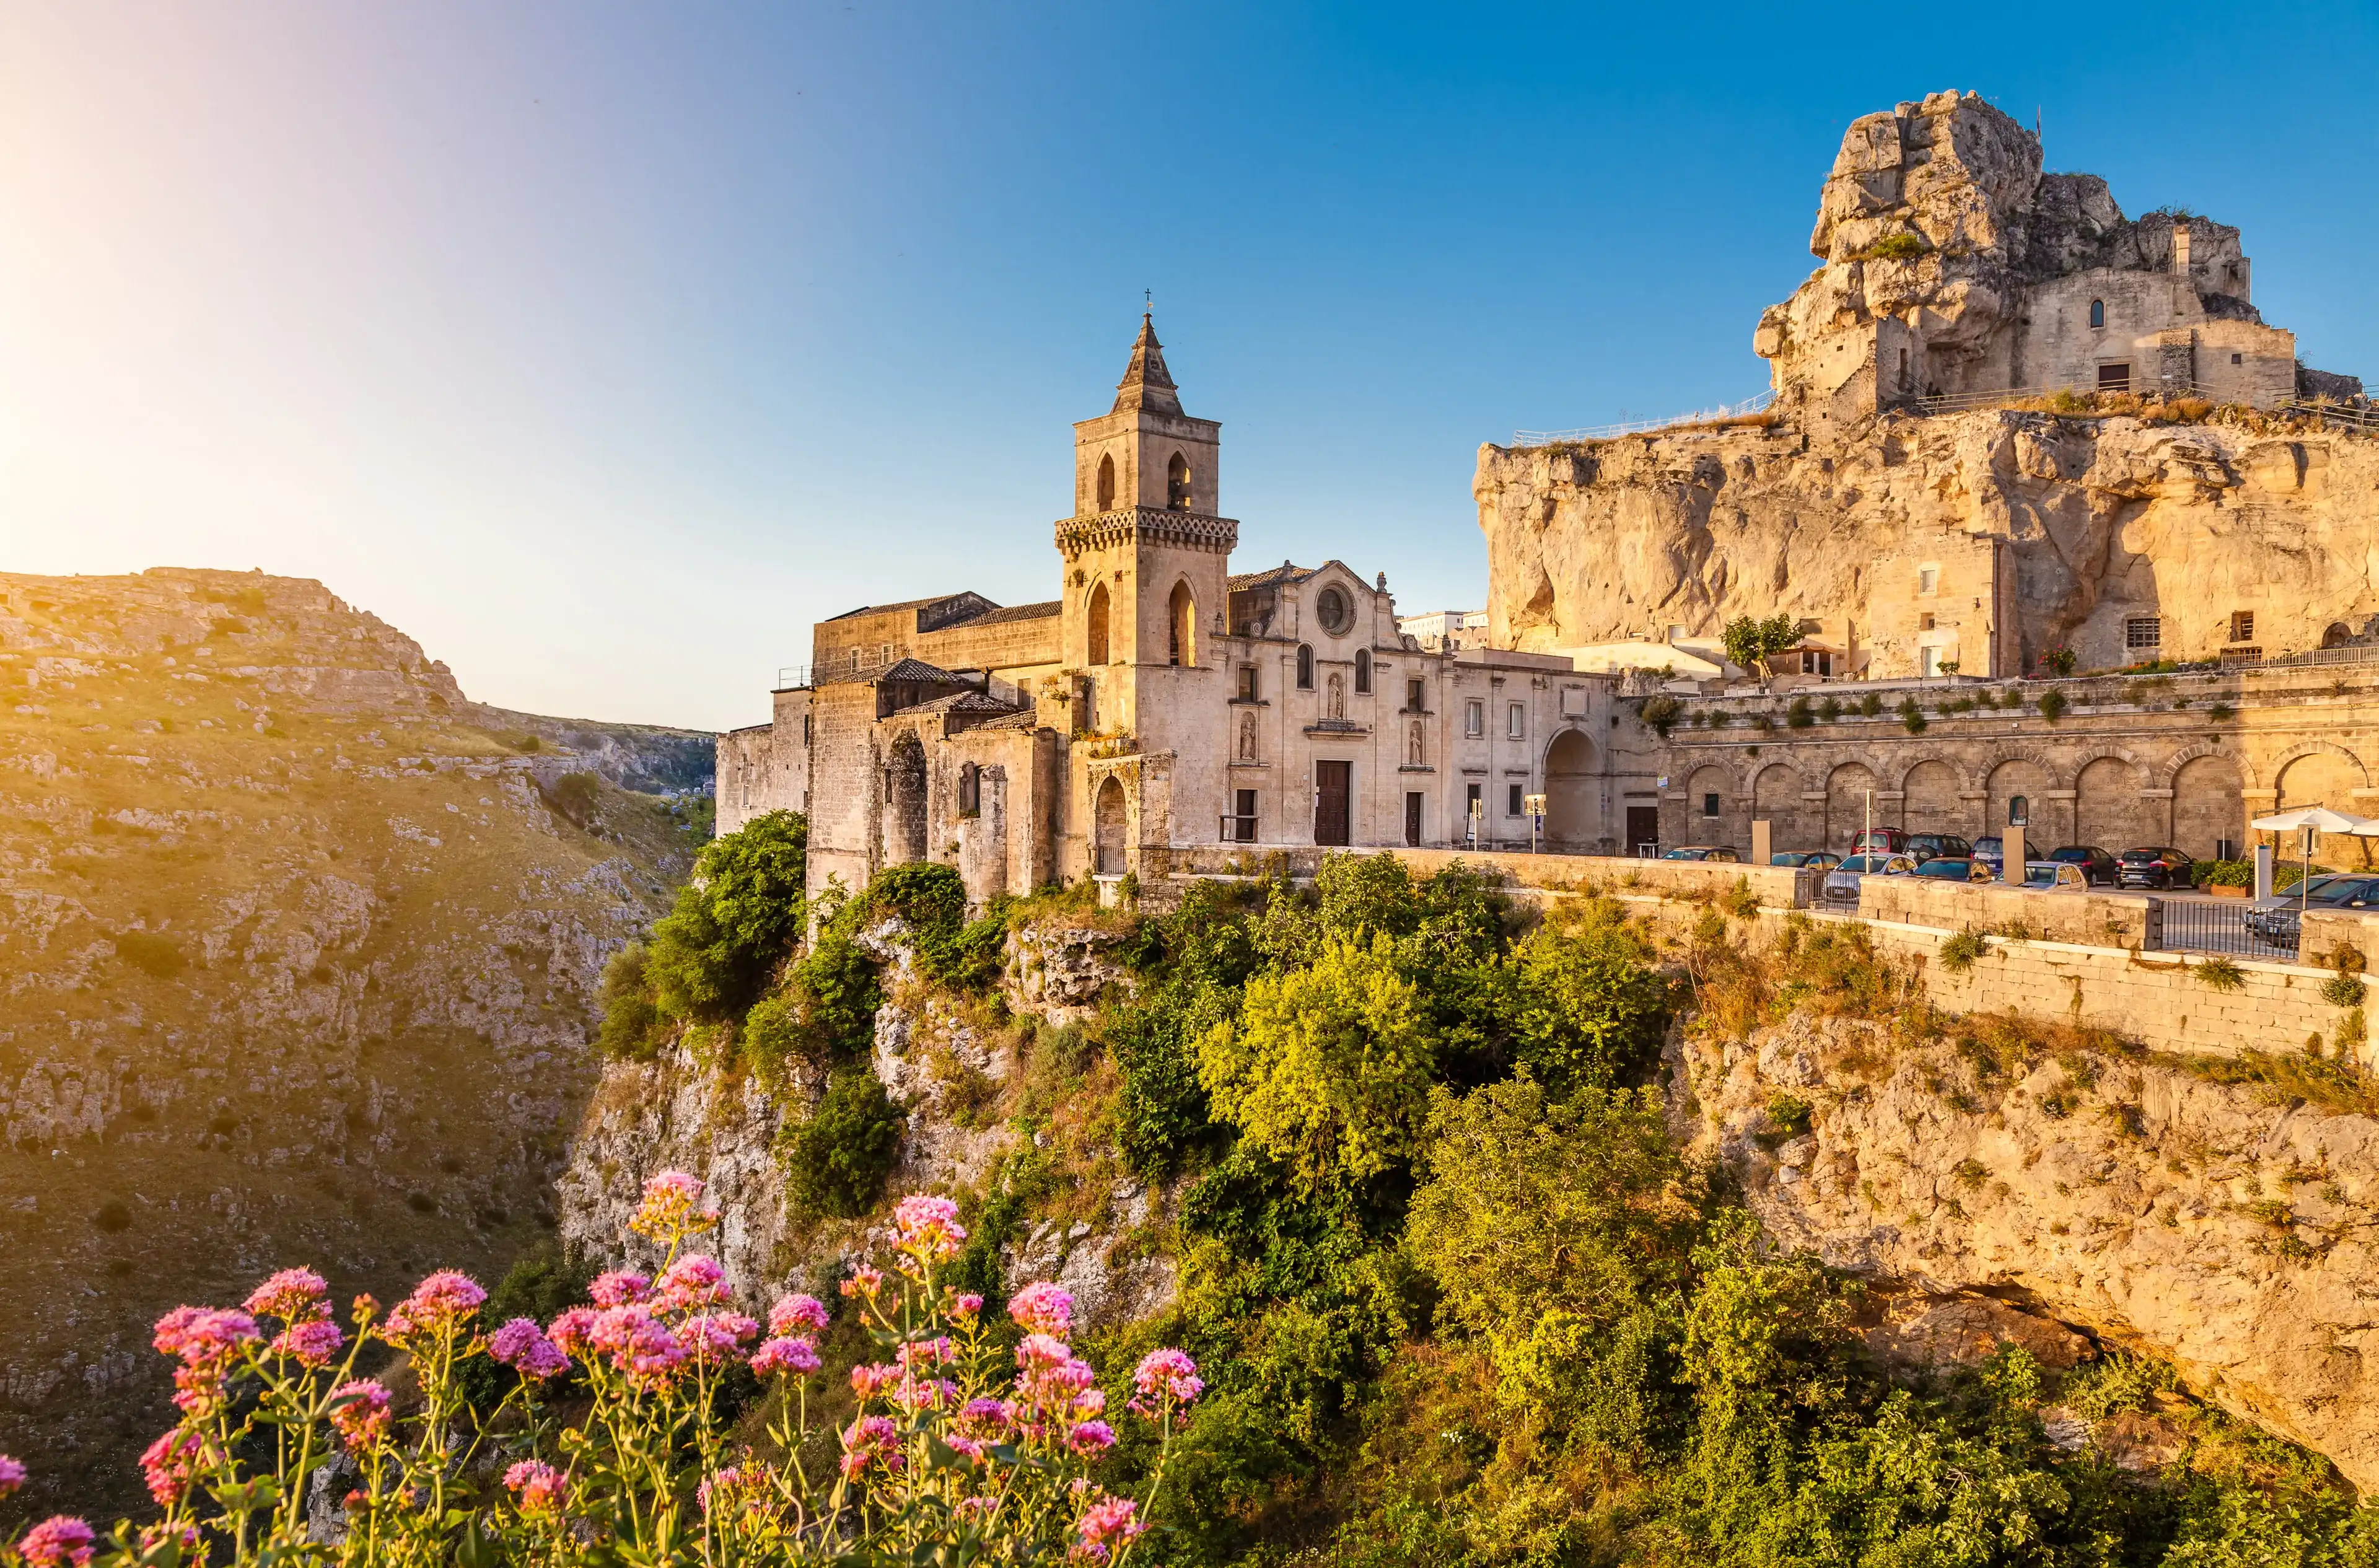 Best Matera hotels. Cheap hotels in Matera, Italy